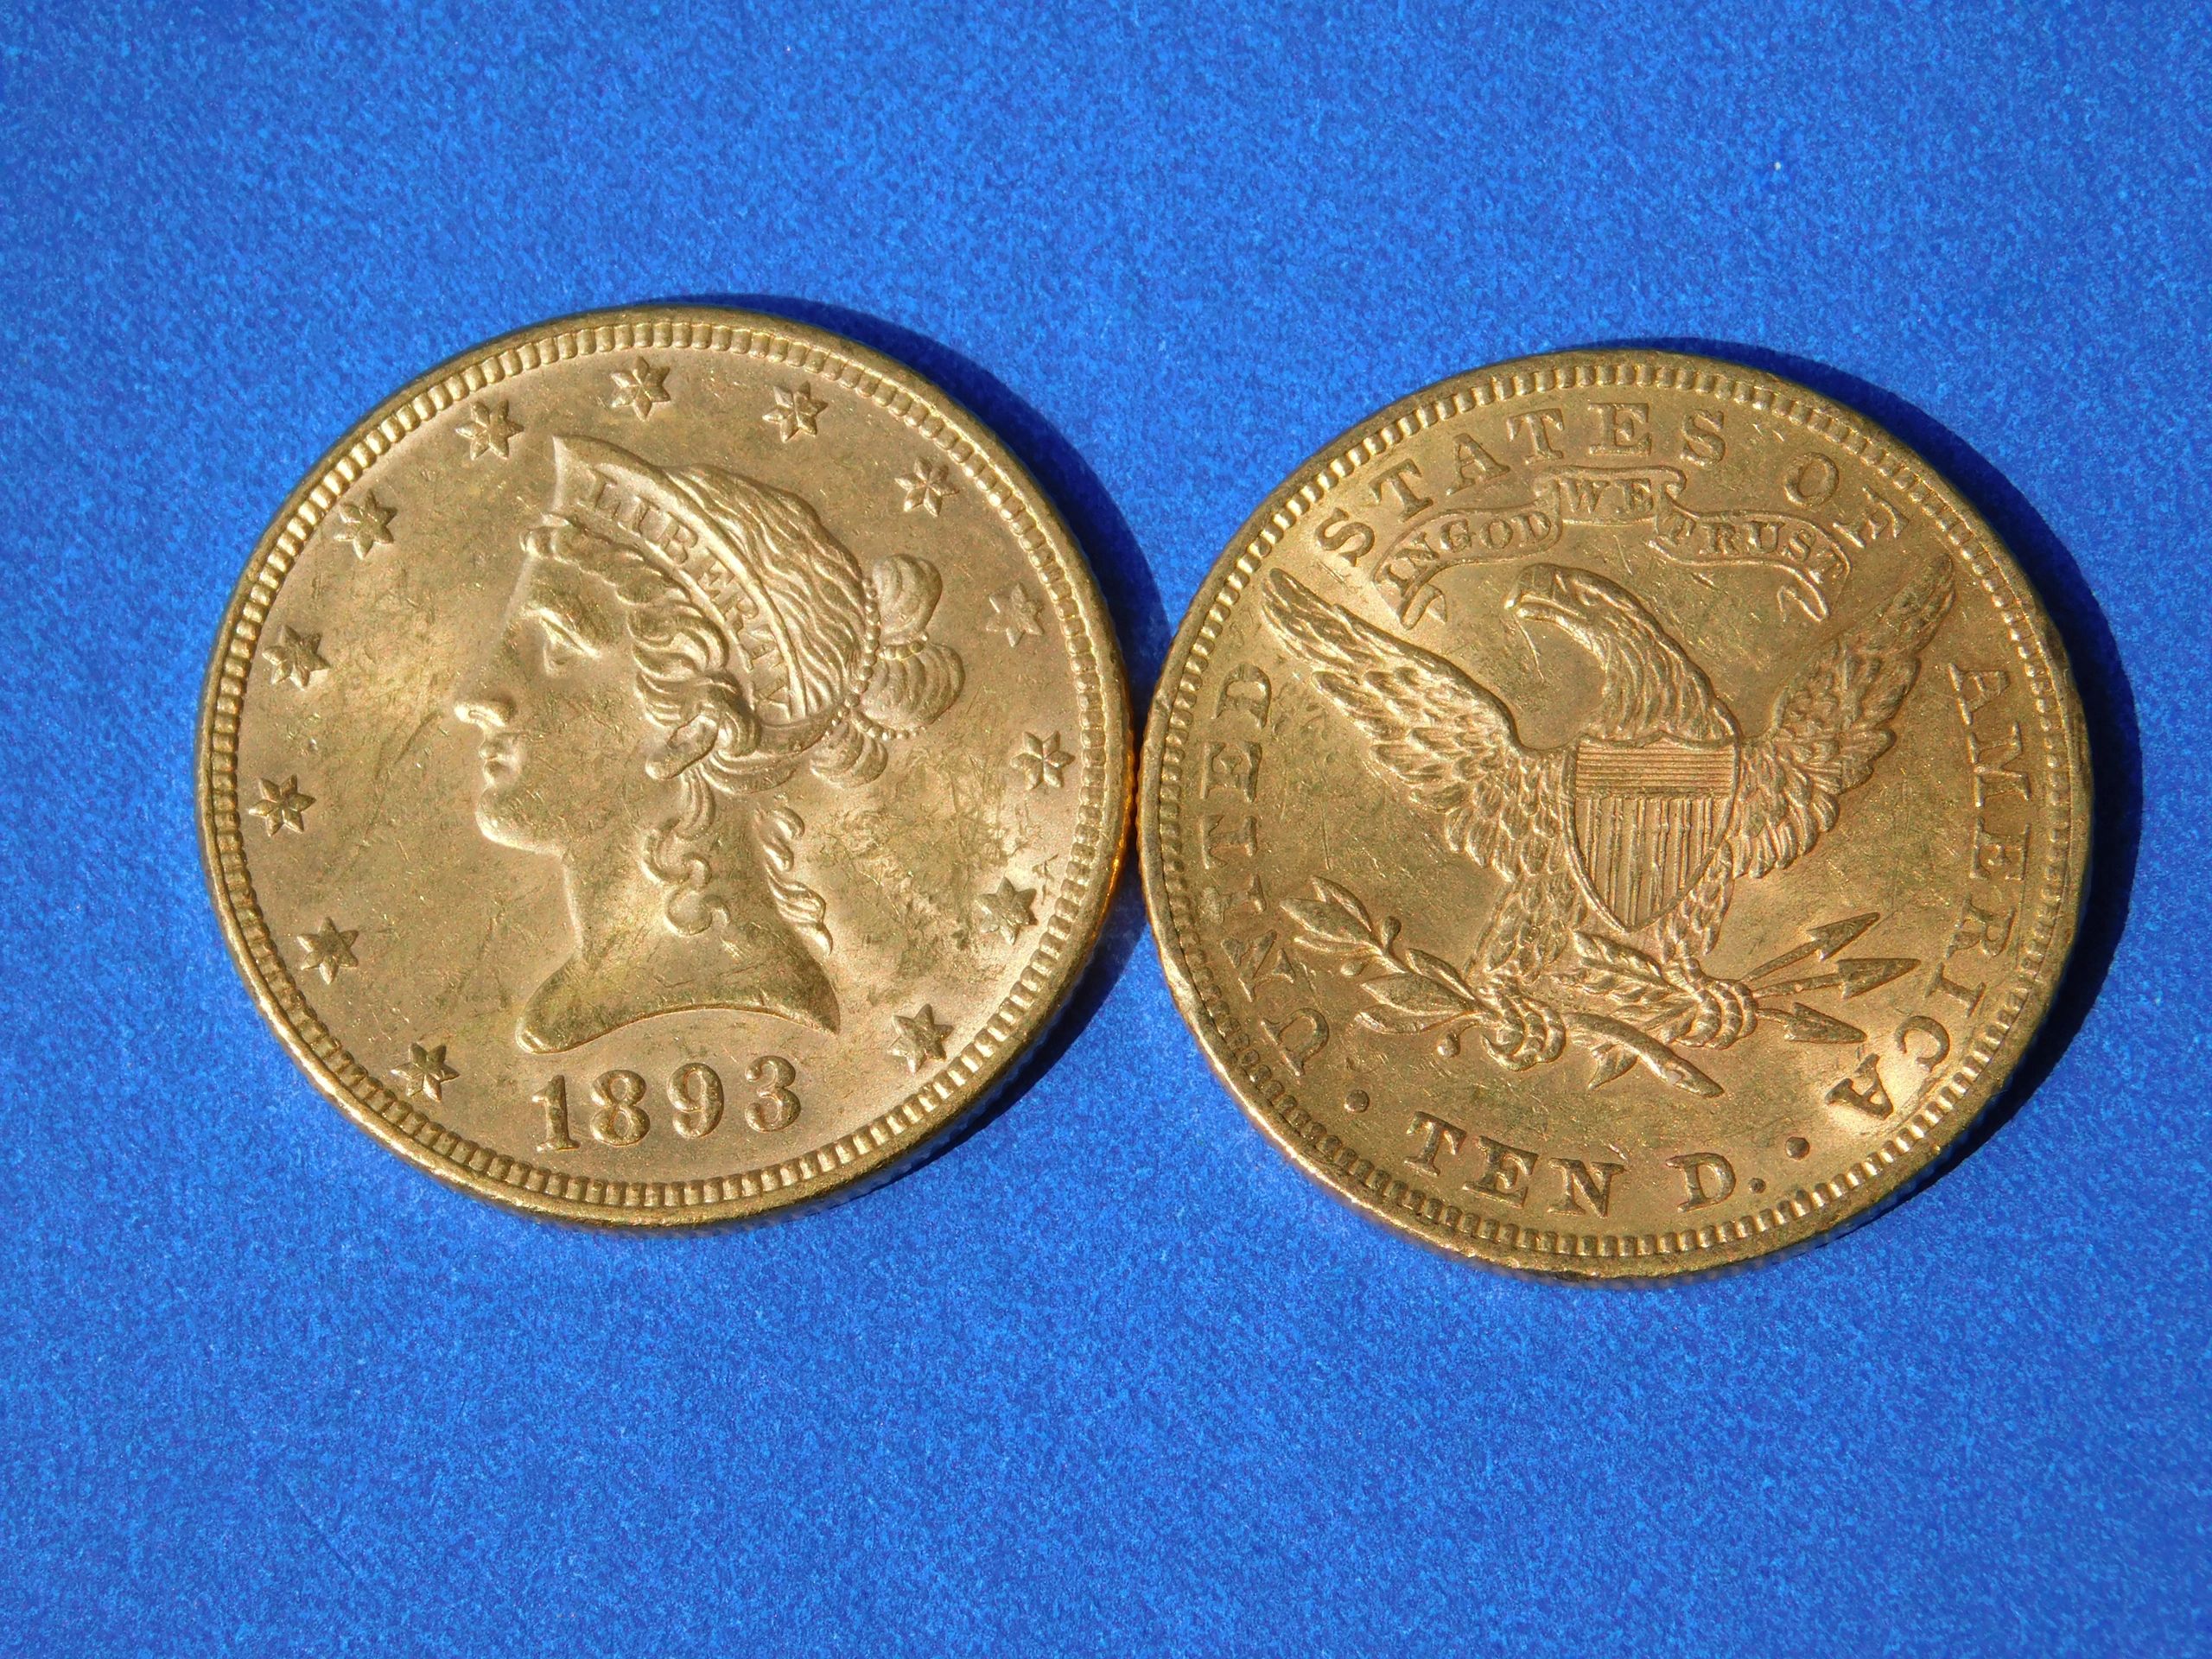 Raleigh Gold Coin Dealers Best Place To Buy Sell Gold Silver Coin Collections Rare Coins Bullion Sell Silver Sell Gold Sell Coins Raleigh Gold Coin Dealers Best Place To Buy Sell Gold Silver Coin Collections Rare Coins Bullion,Rum Runner Drink History